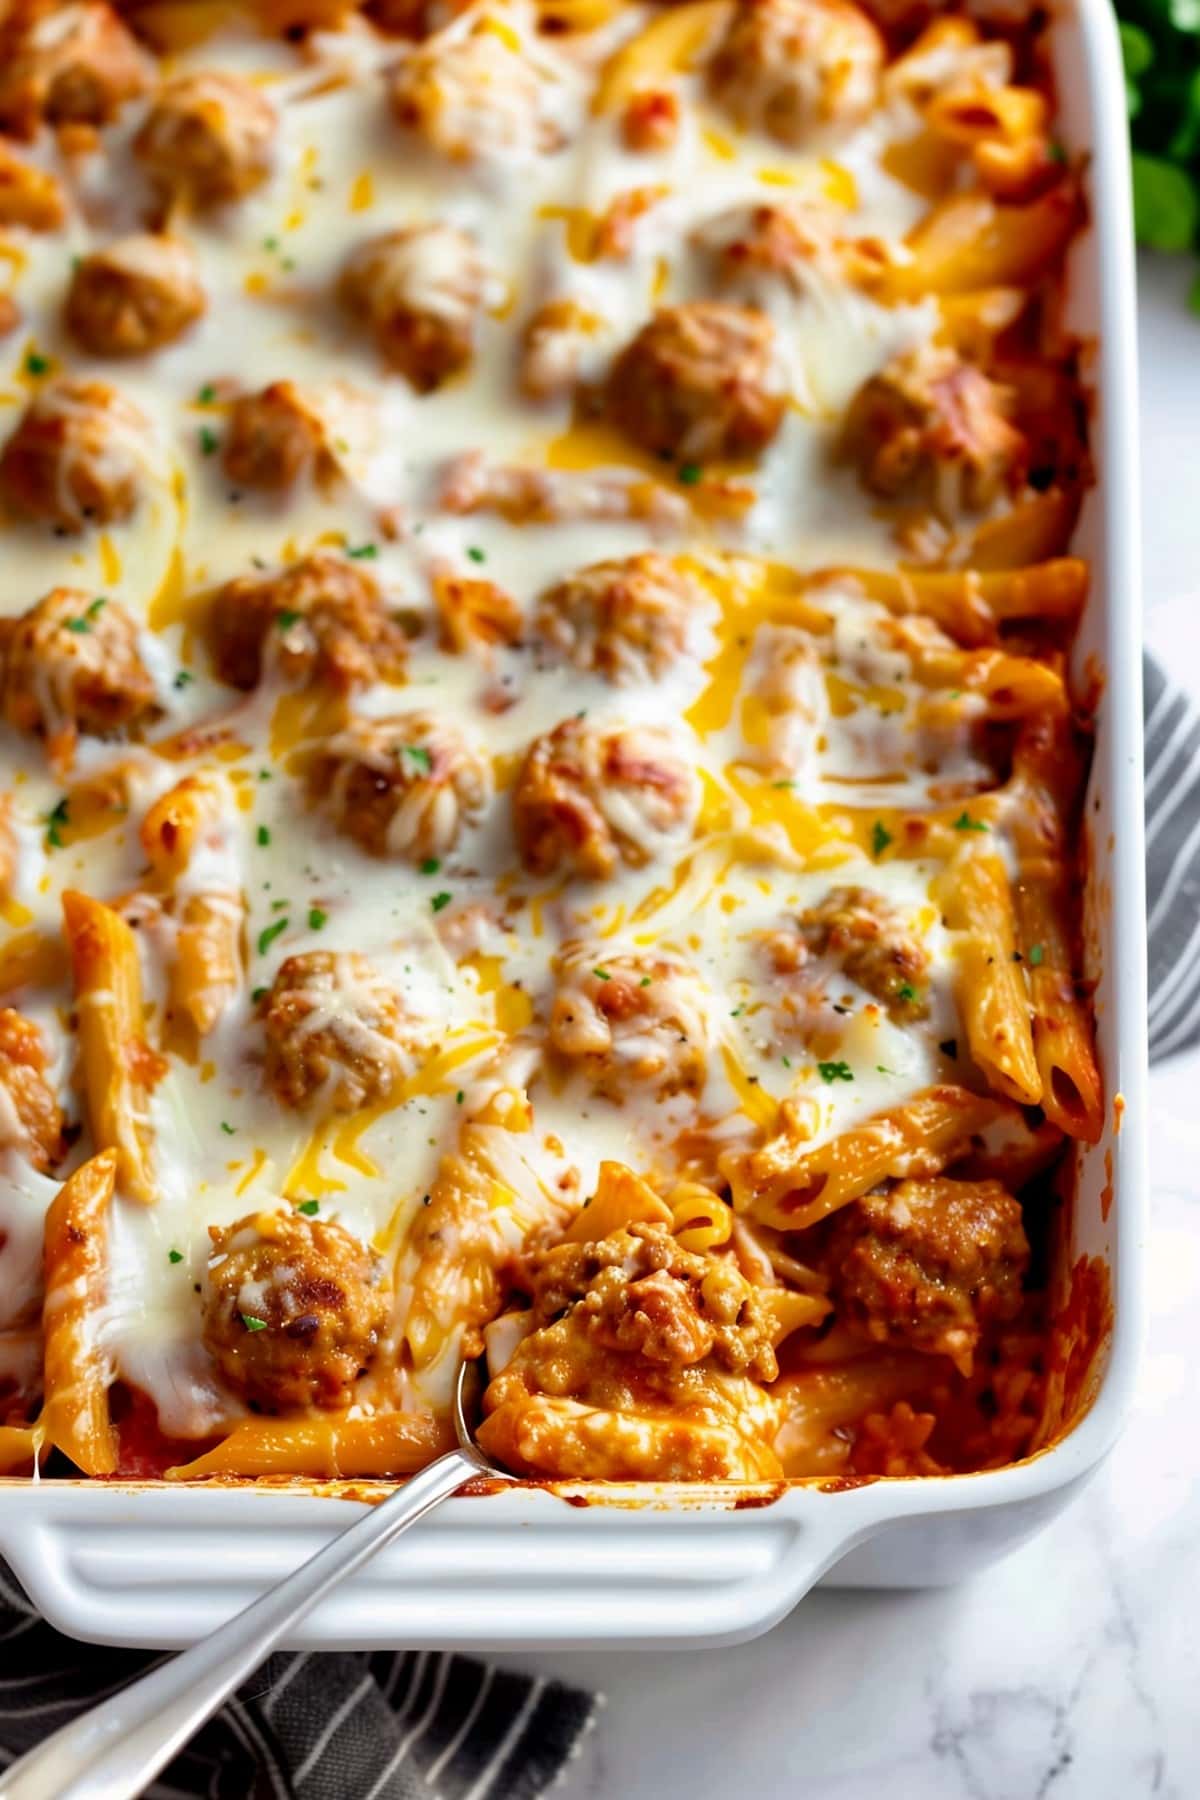 Cheesy and meaty homemade meatball casserole with pasta